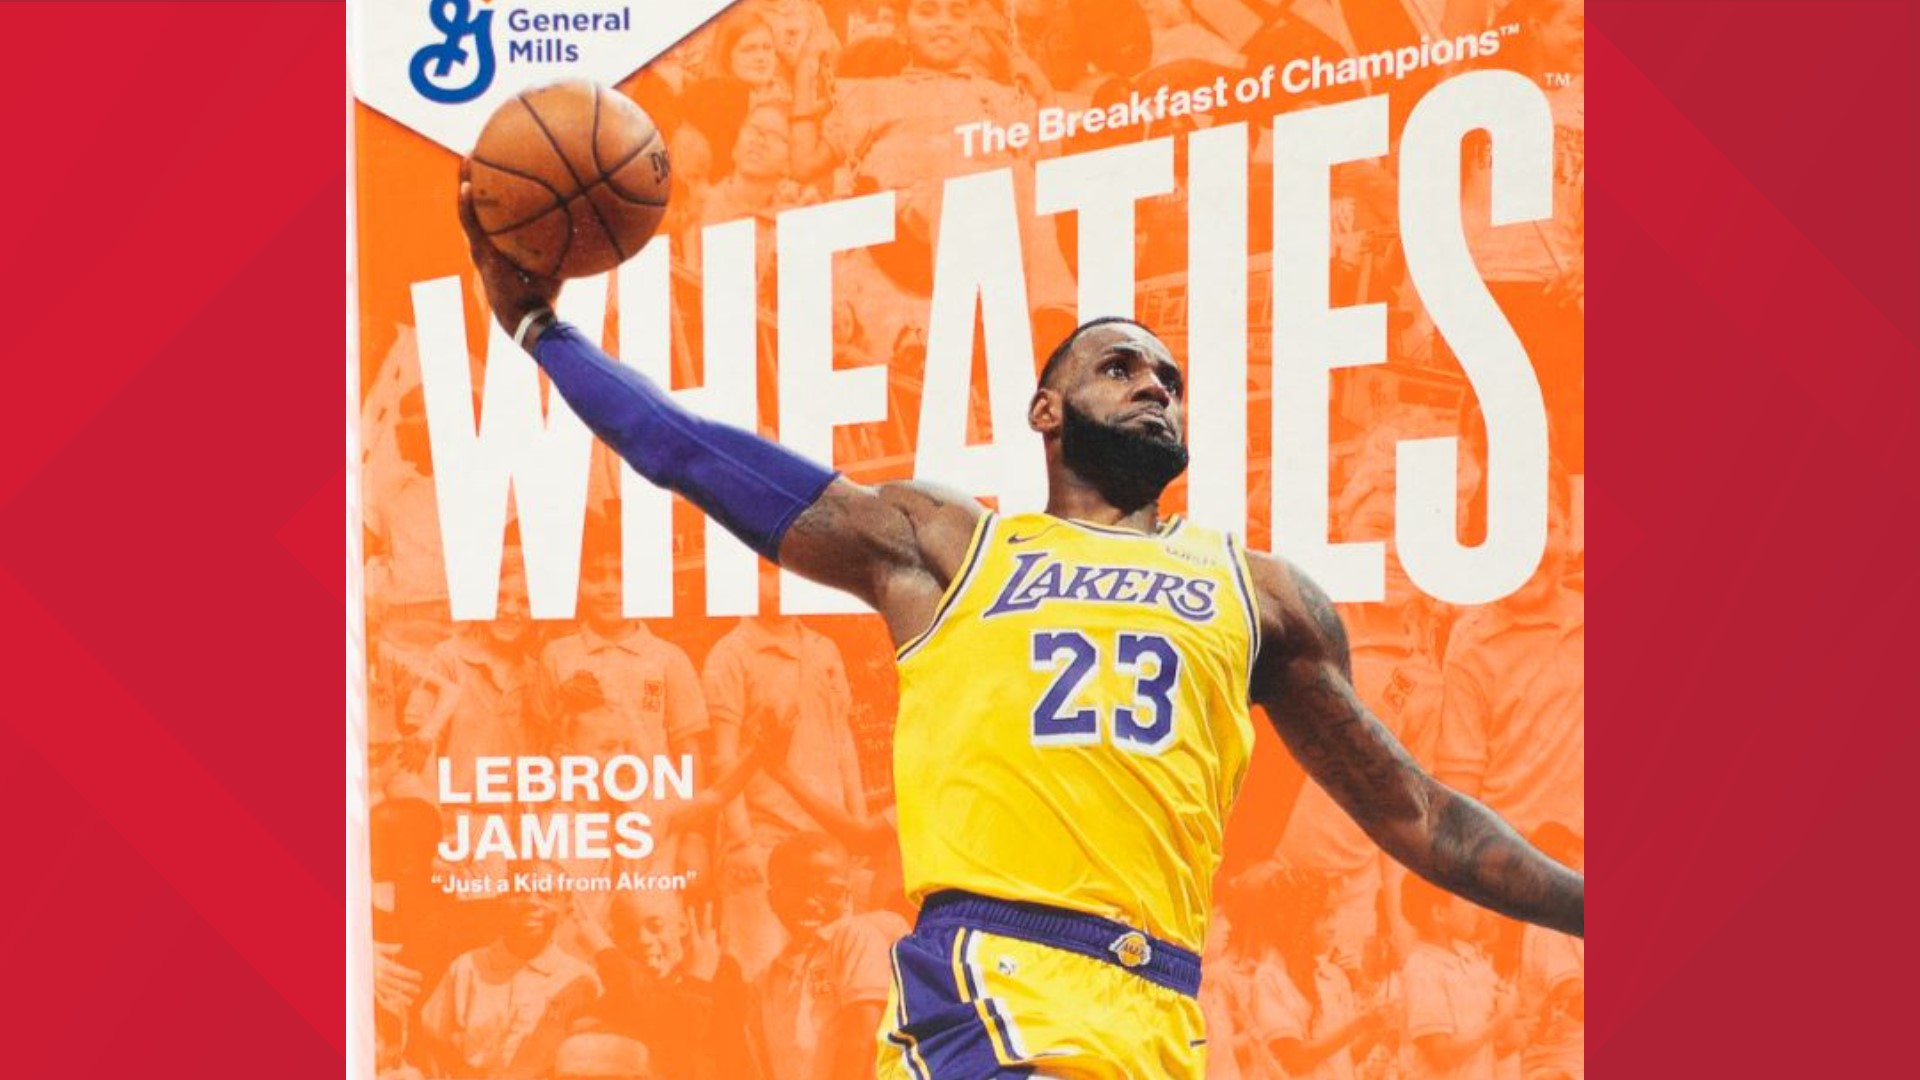 Oct. 7, 2020: The breakfast of champions is honoring Akron, Ohio, in a big way. LeBron James and I PROMISE School students are on the next Wheaties box.